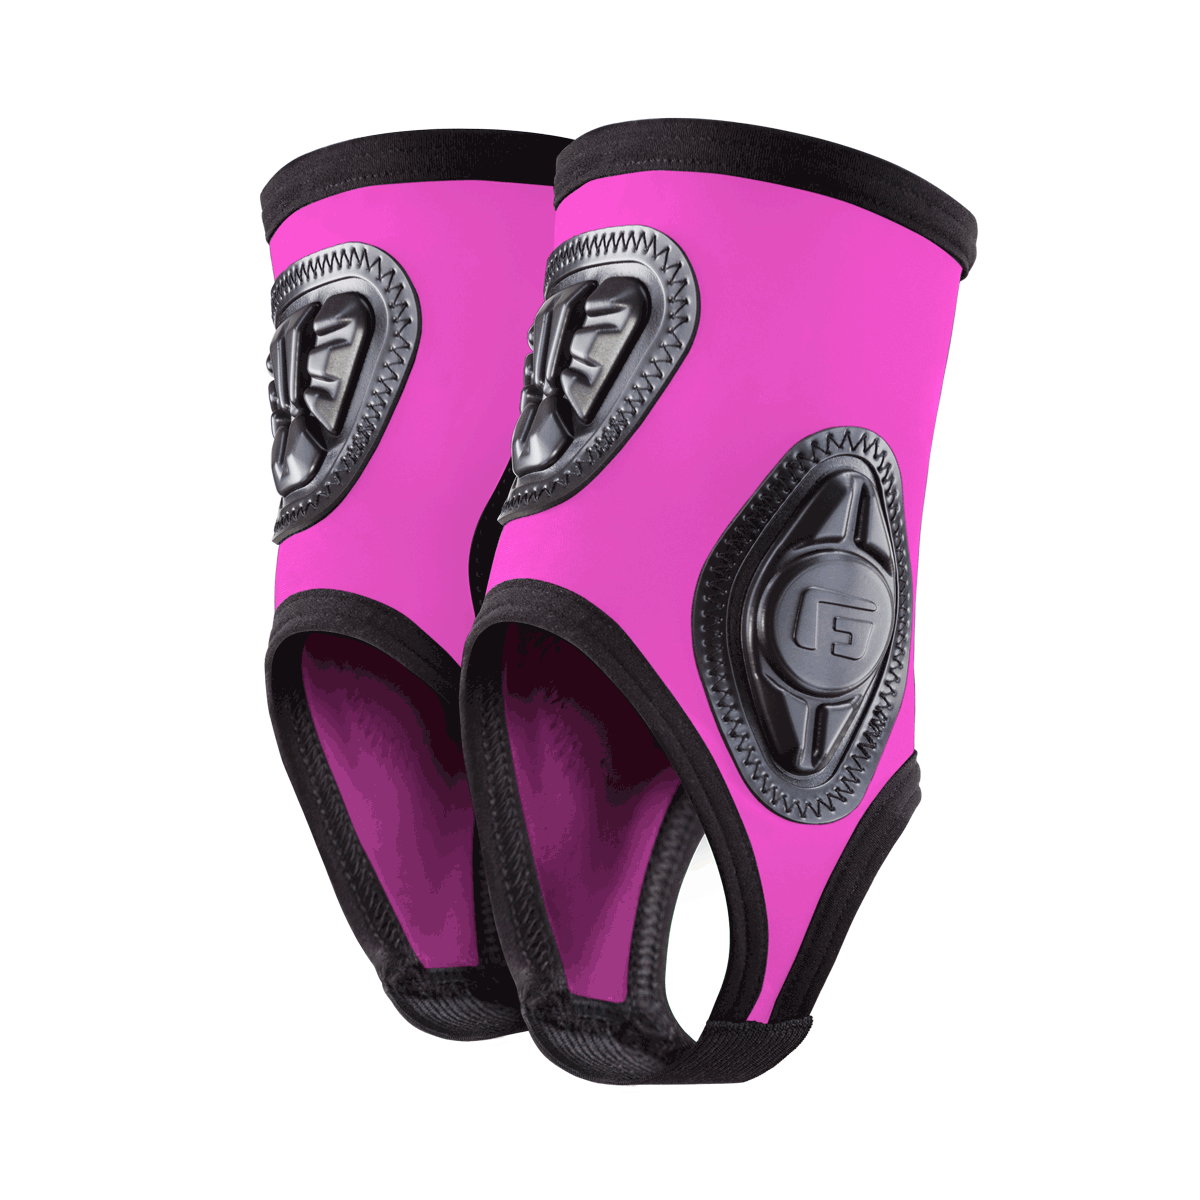 Mountain Bike Soccer ankle protection ankle padding sleeve ankle bon pads